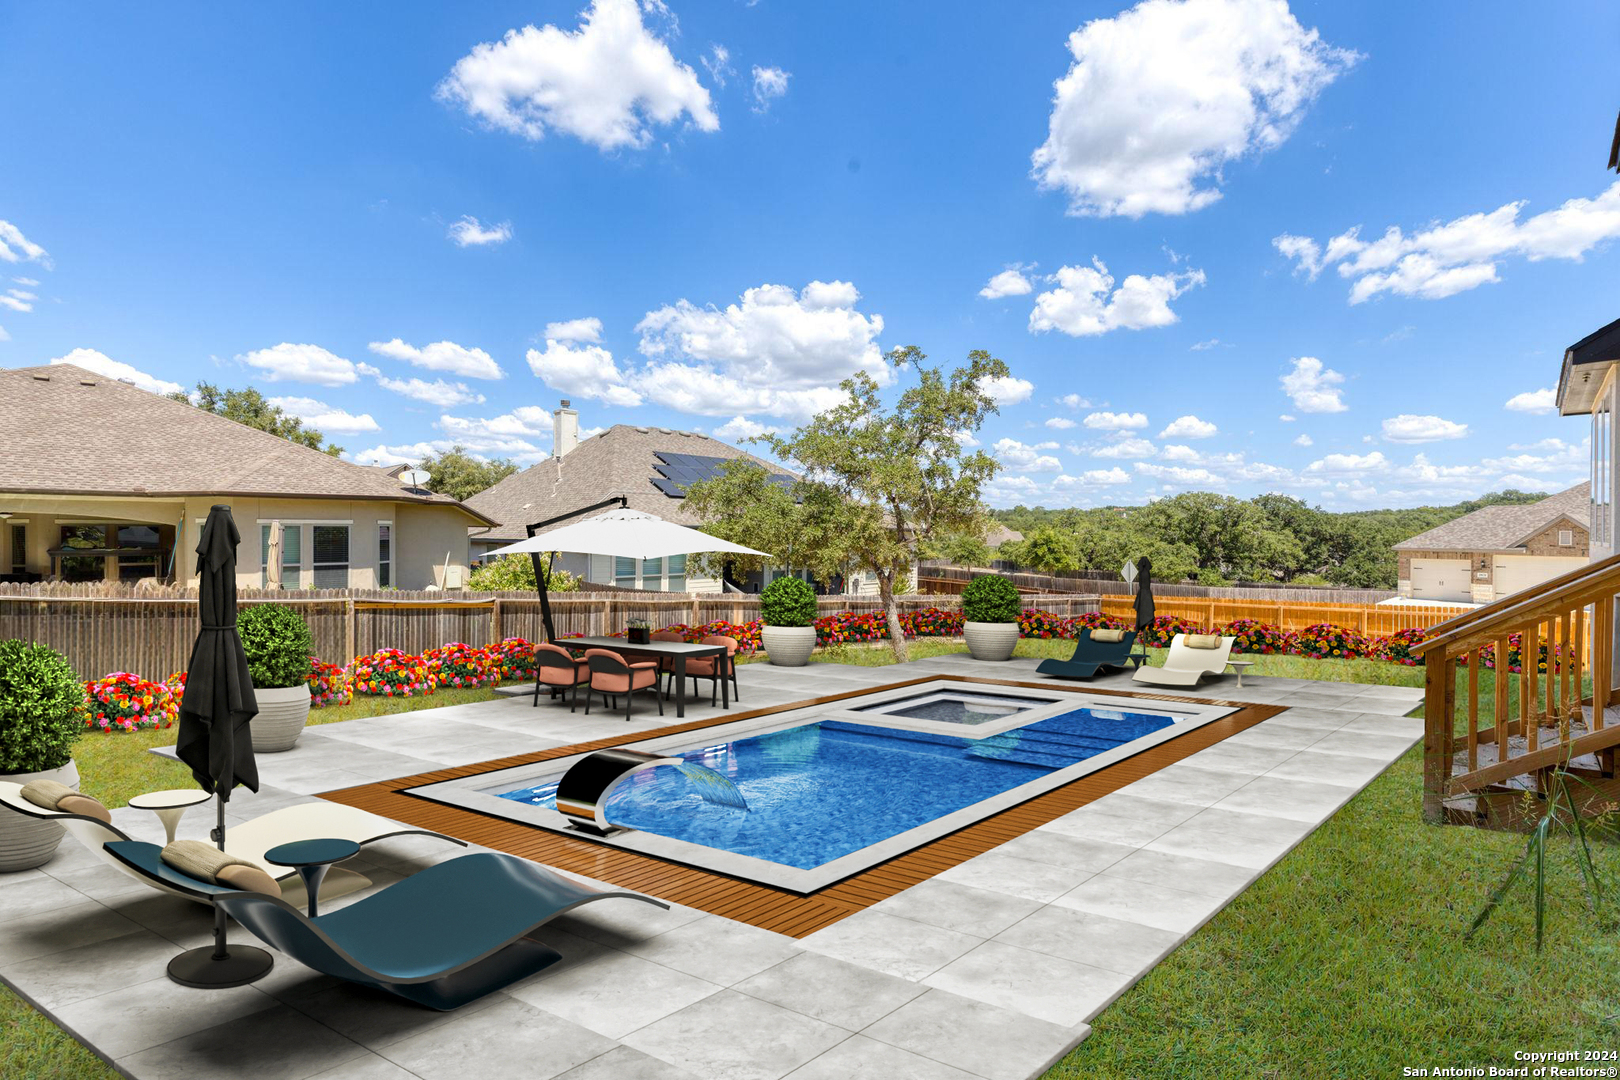 Photo of 8603 Caymus Rdg in Boerne, TX